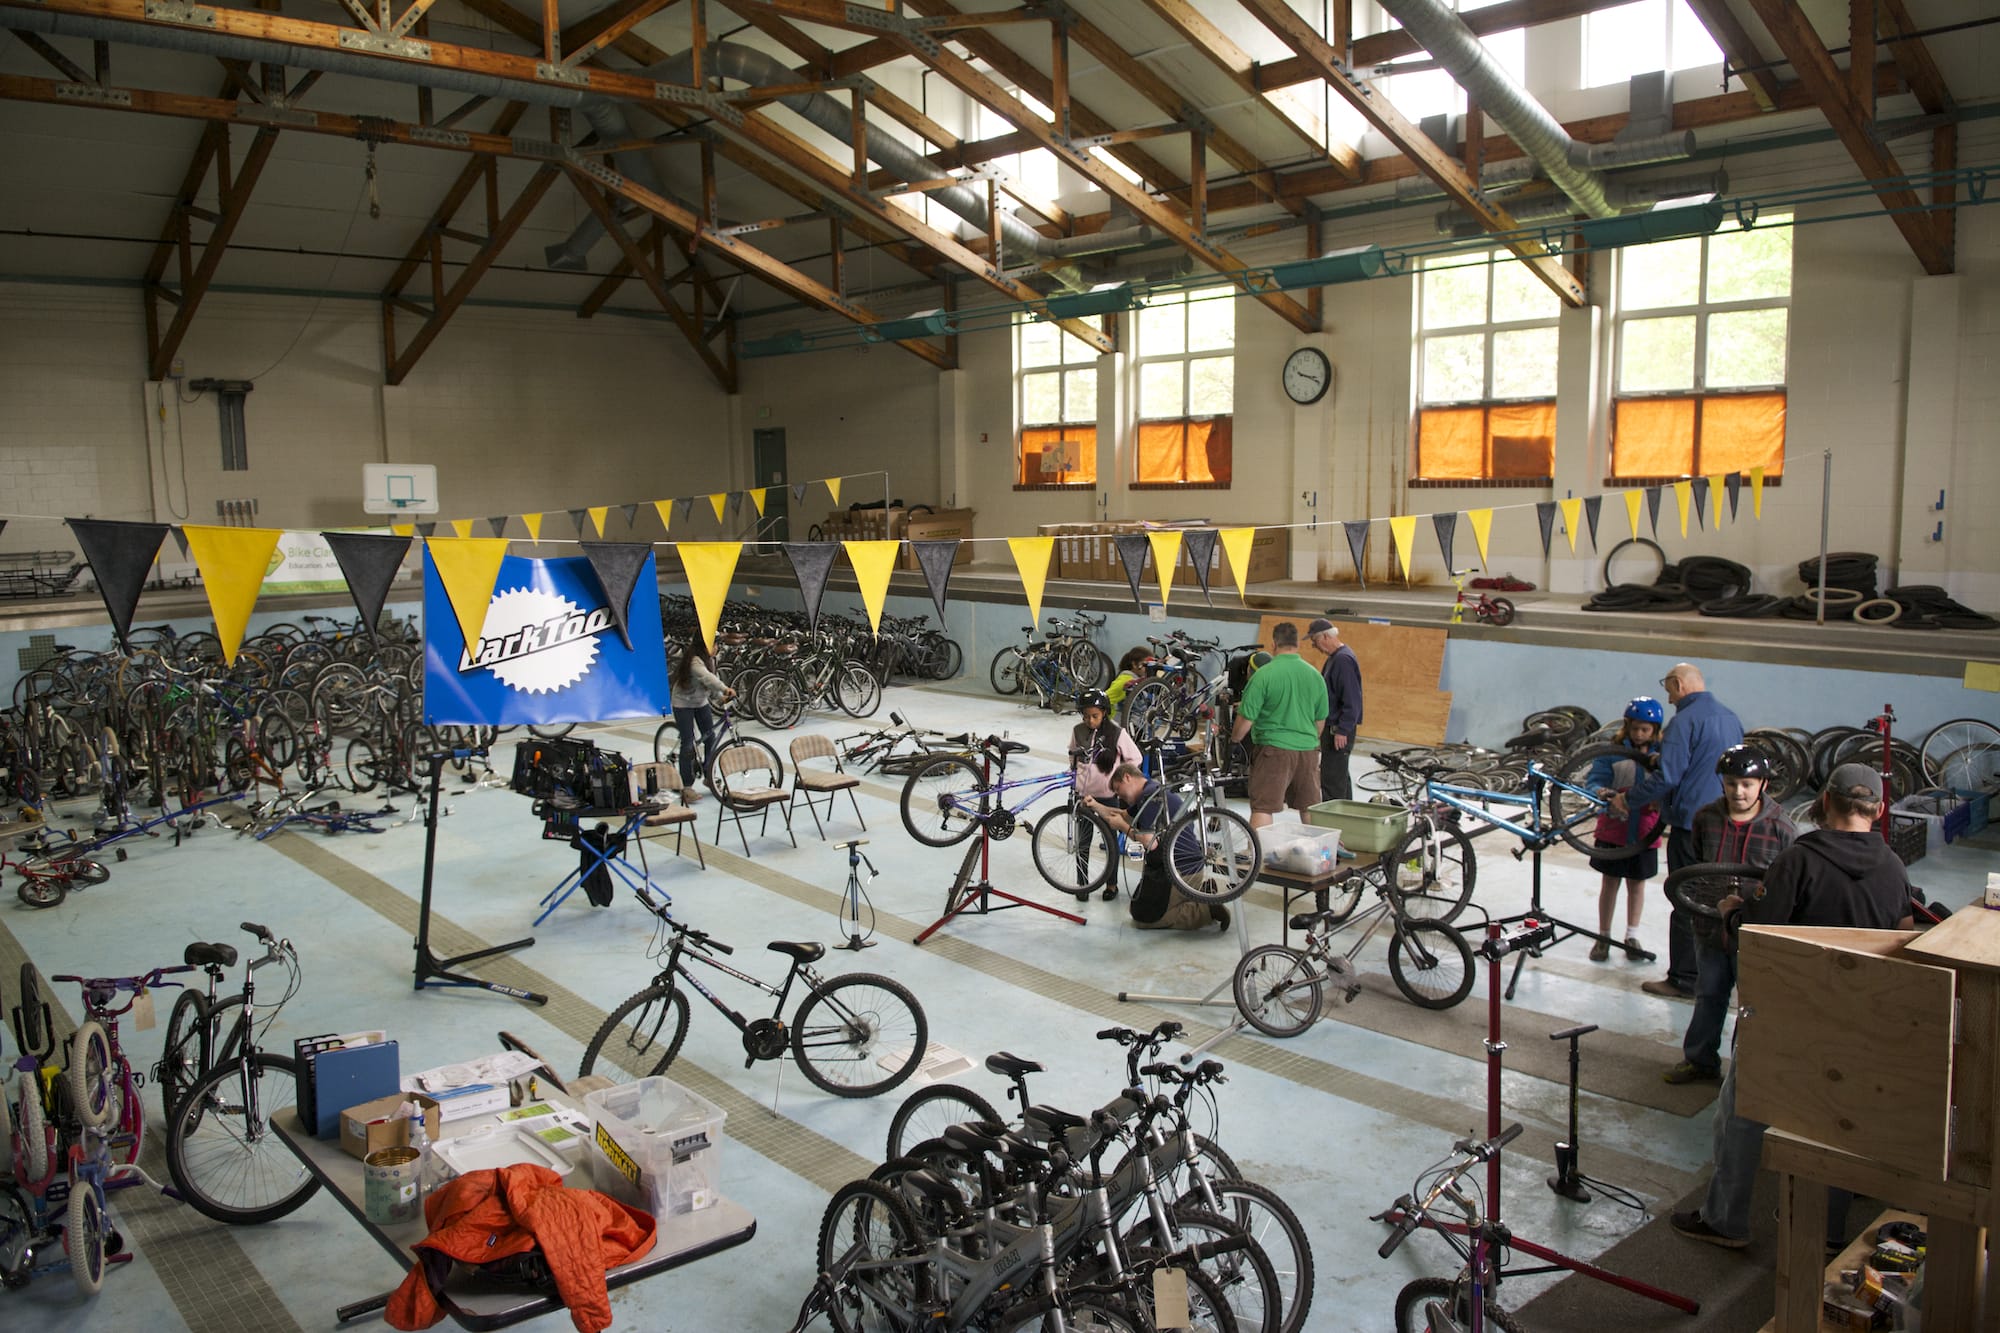 The empty Hough Pool has been the temporary home of nonprofit Bike Clark County for the past few years.